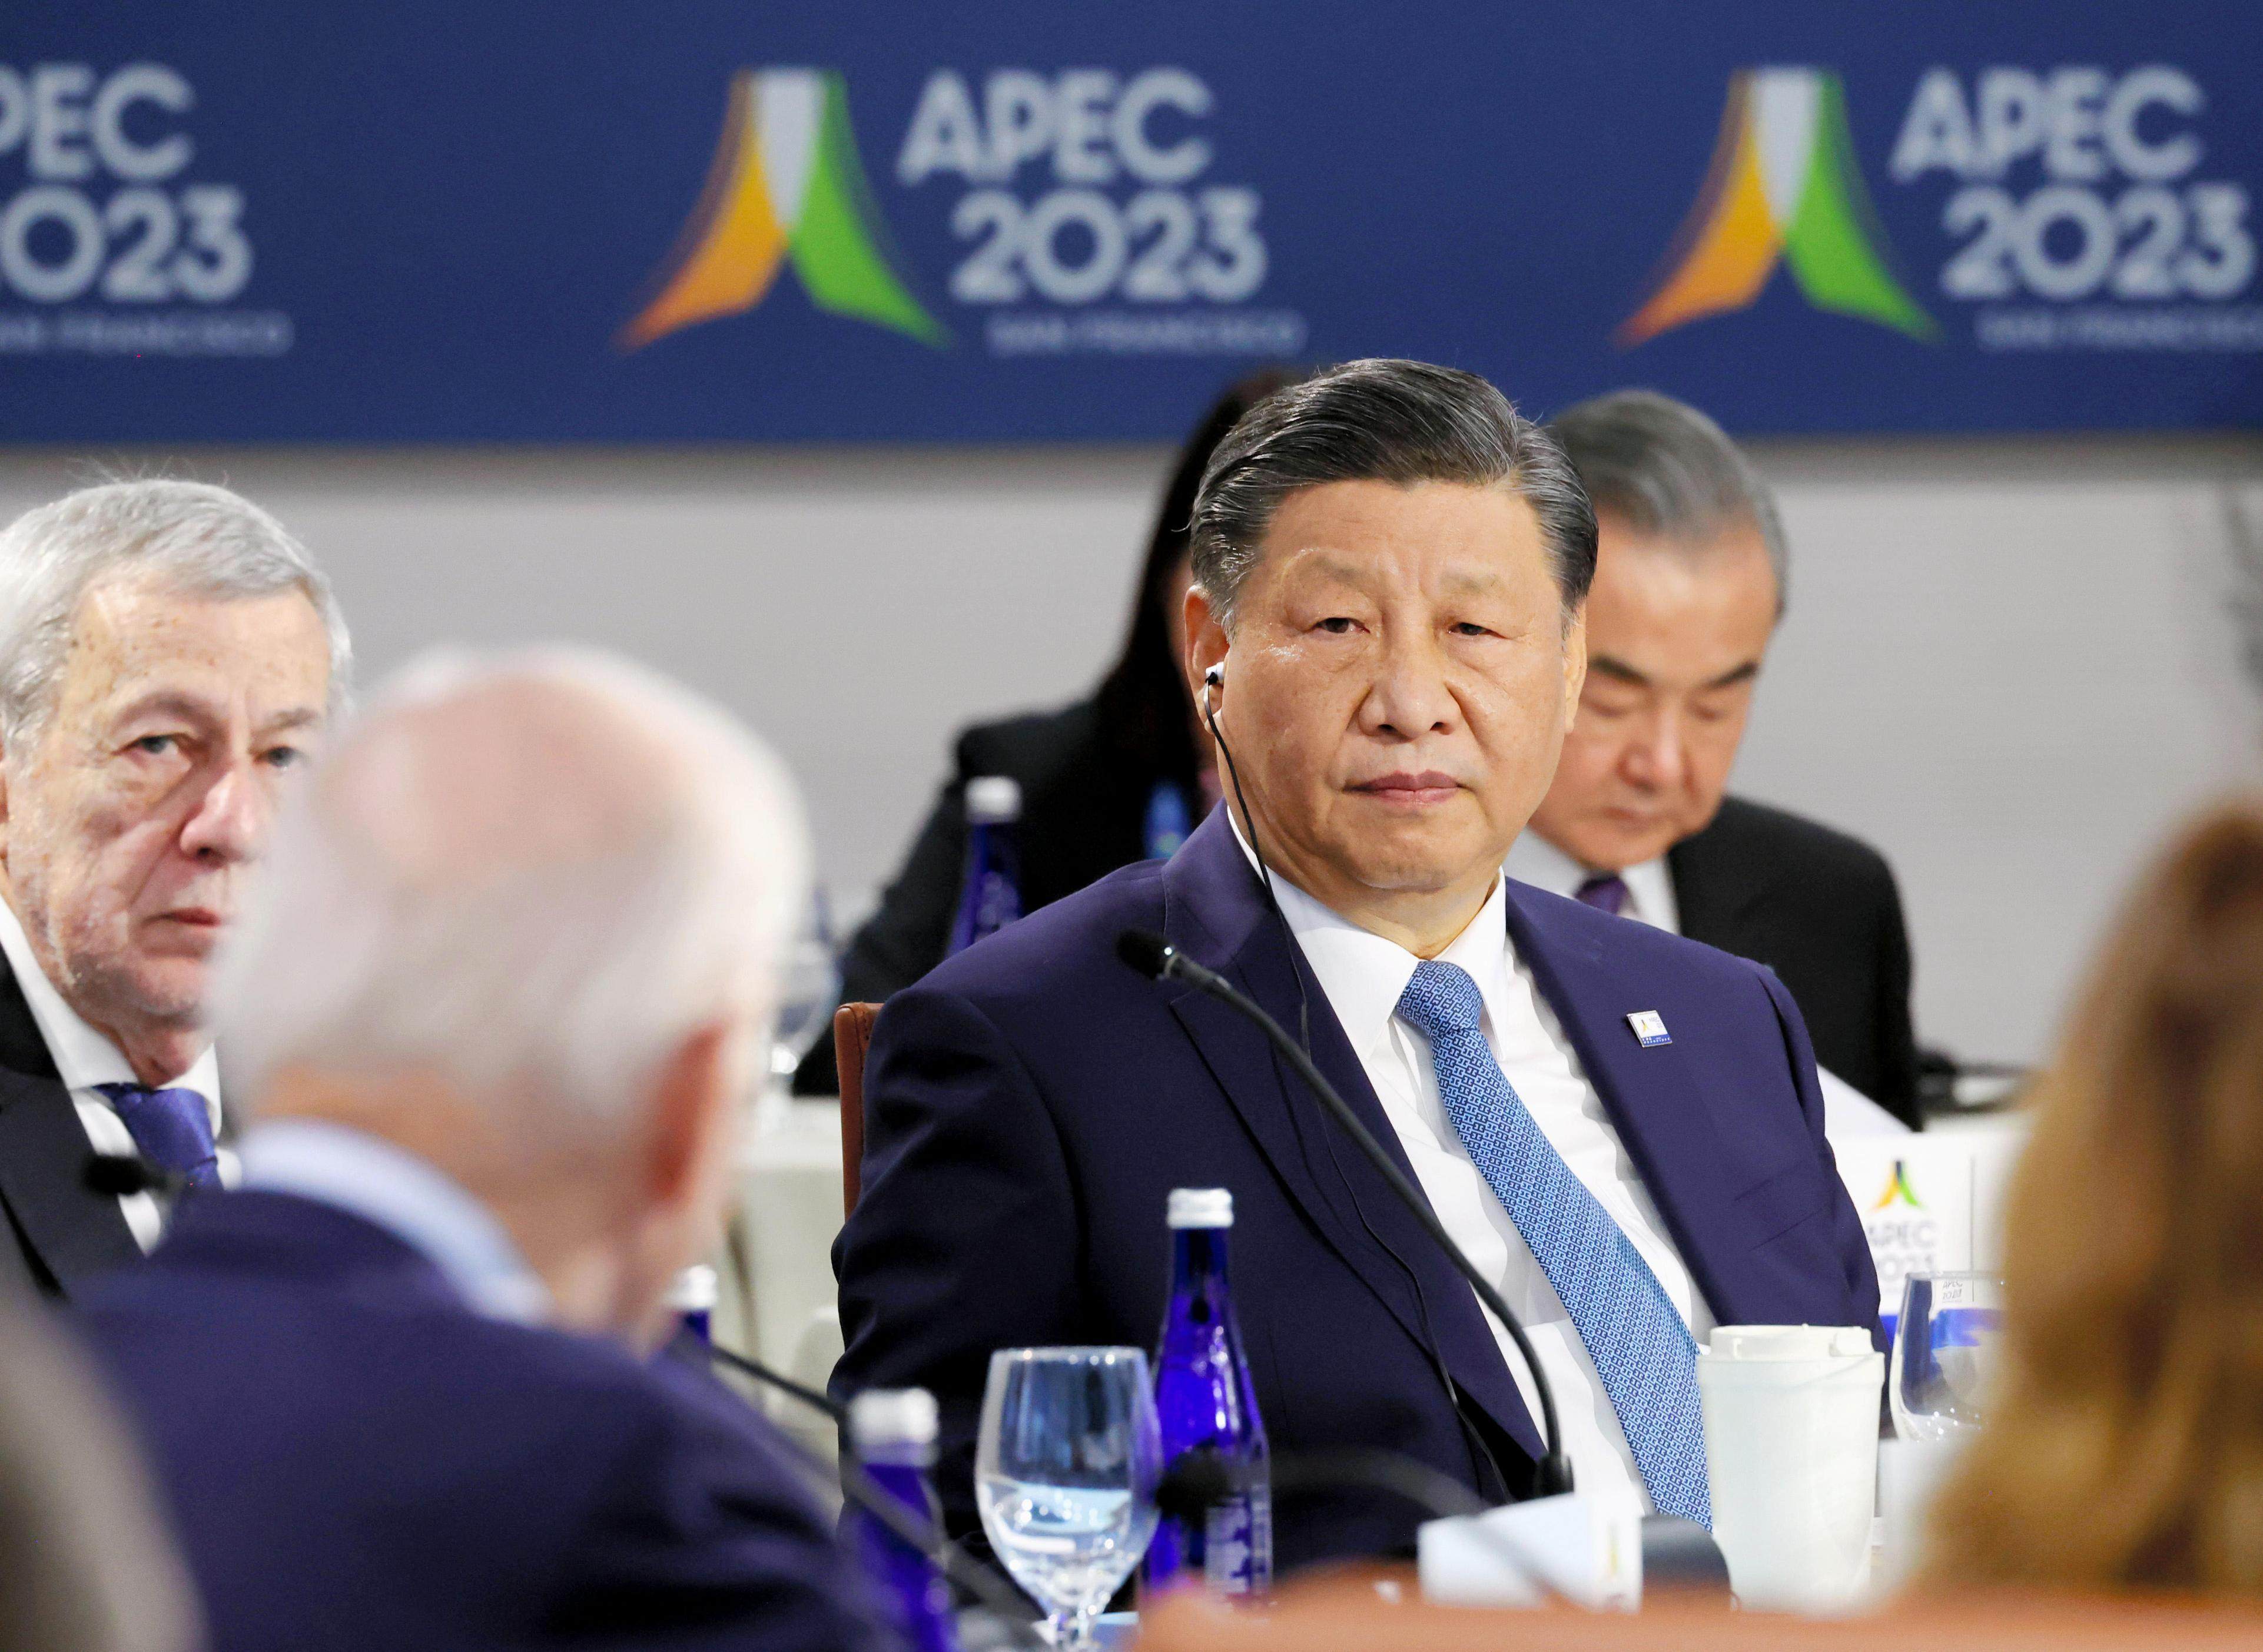 Chinese President Xi Jinping listens to US President Joe Biden during the closing session of the Apec summit in San Francisco on November 17. Photo: Kyodo